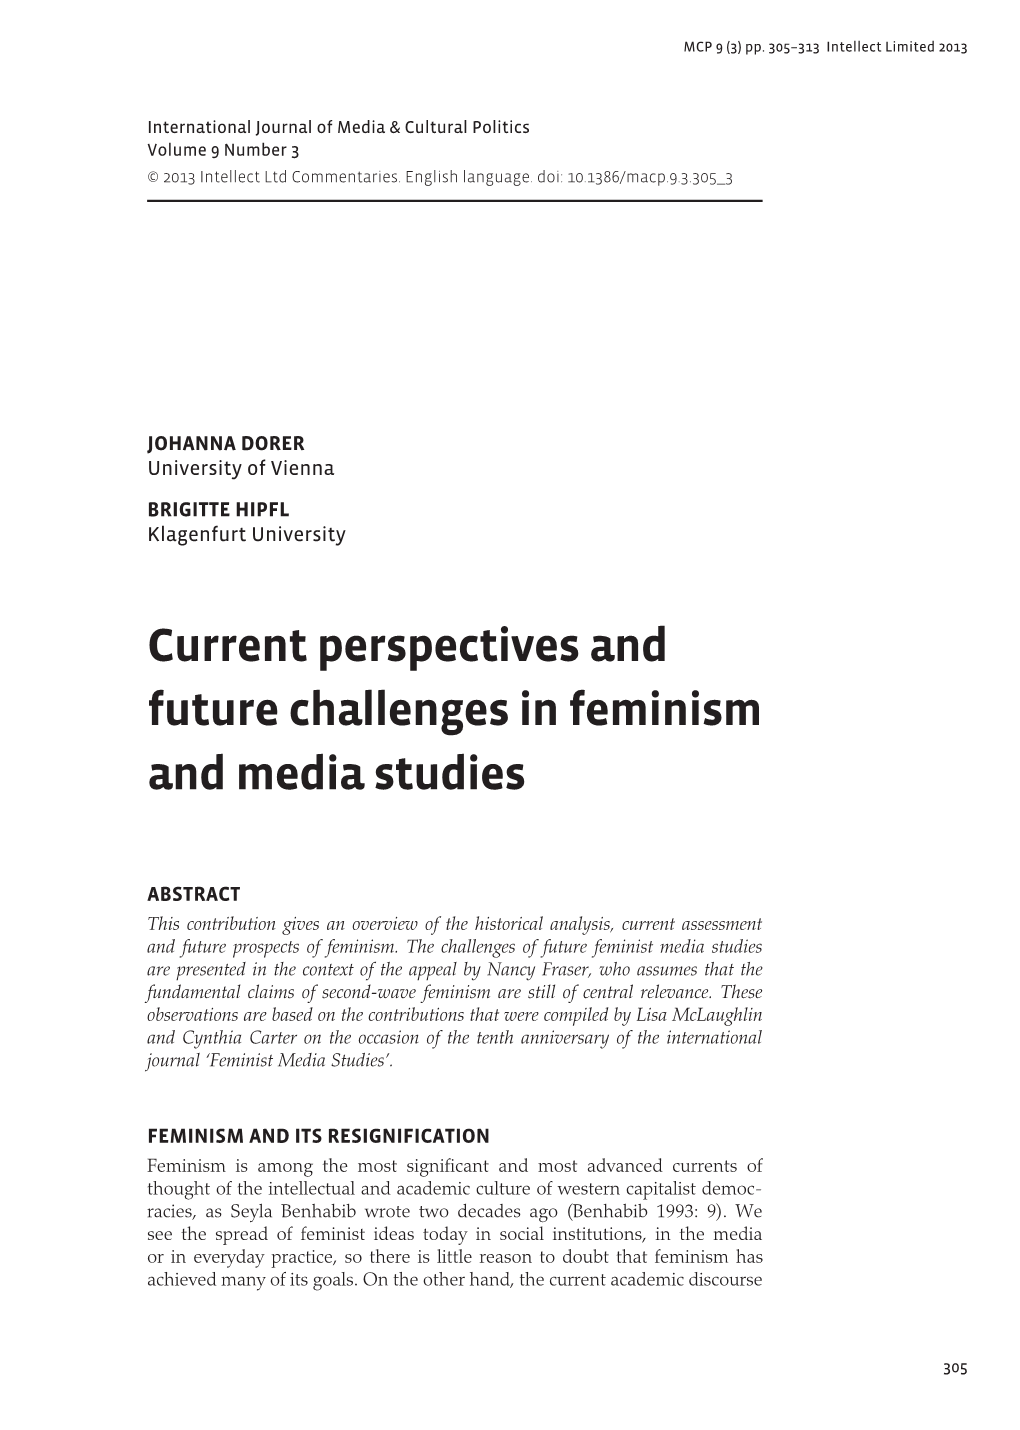 Current Perspectives and Future Challenges in Feminism and Media Studies